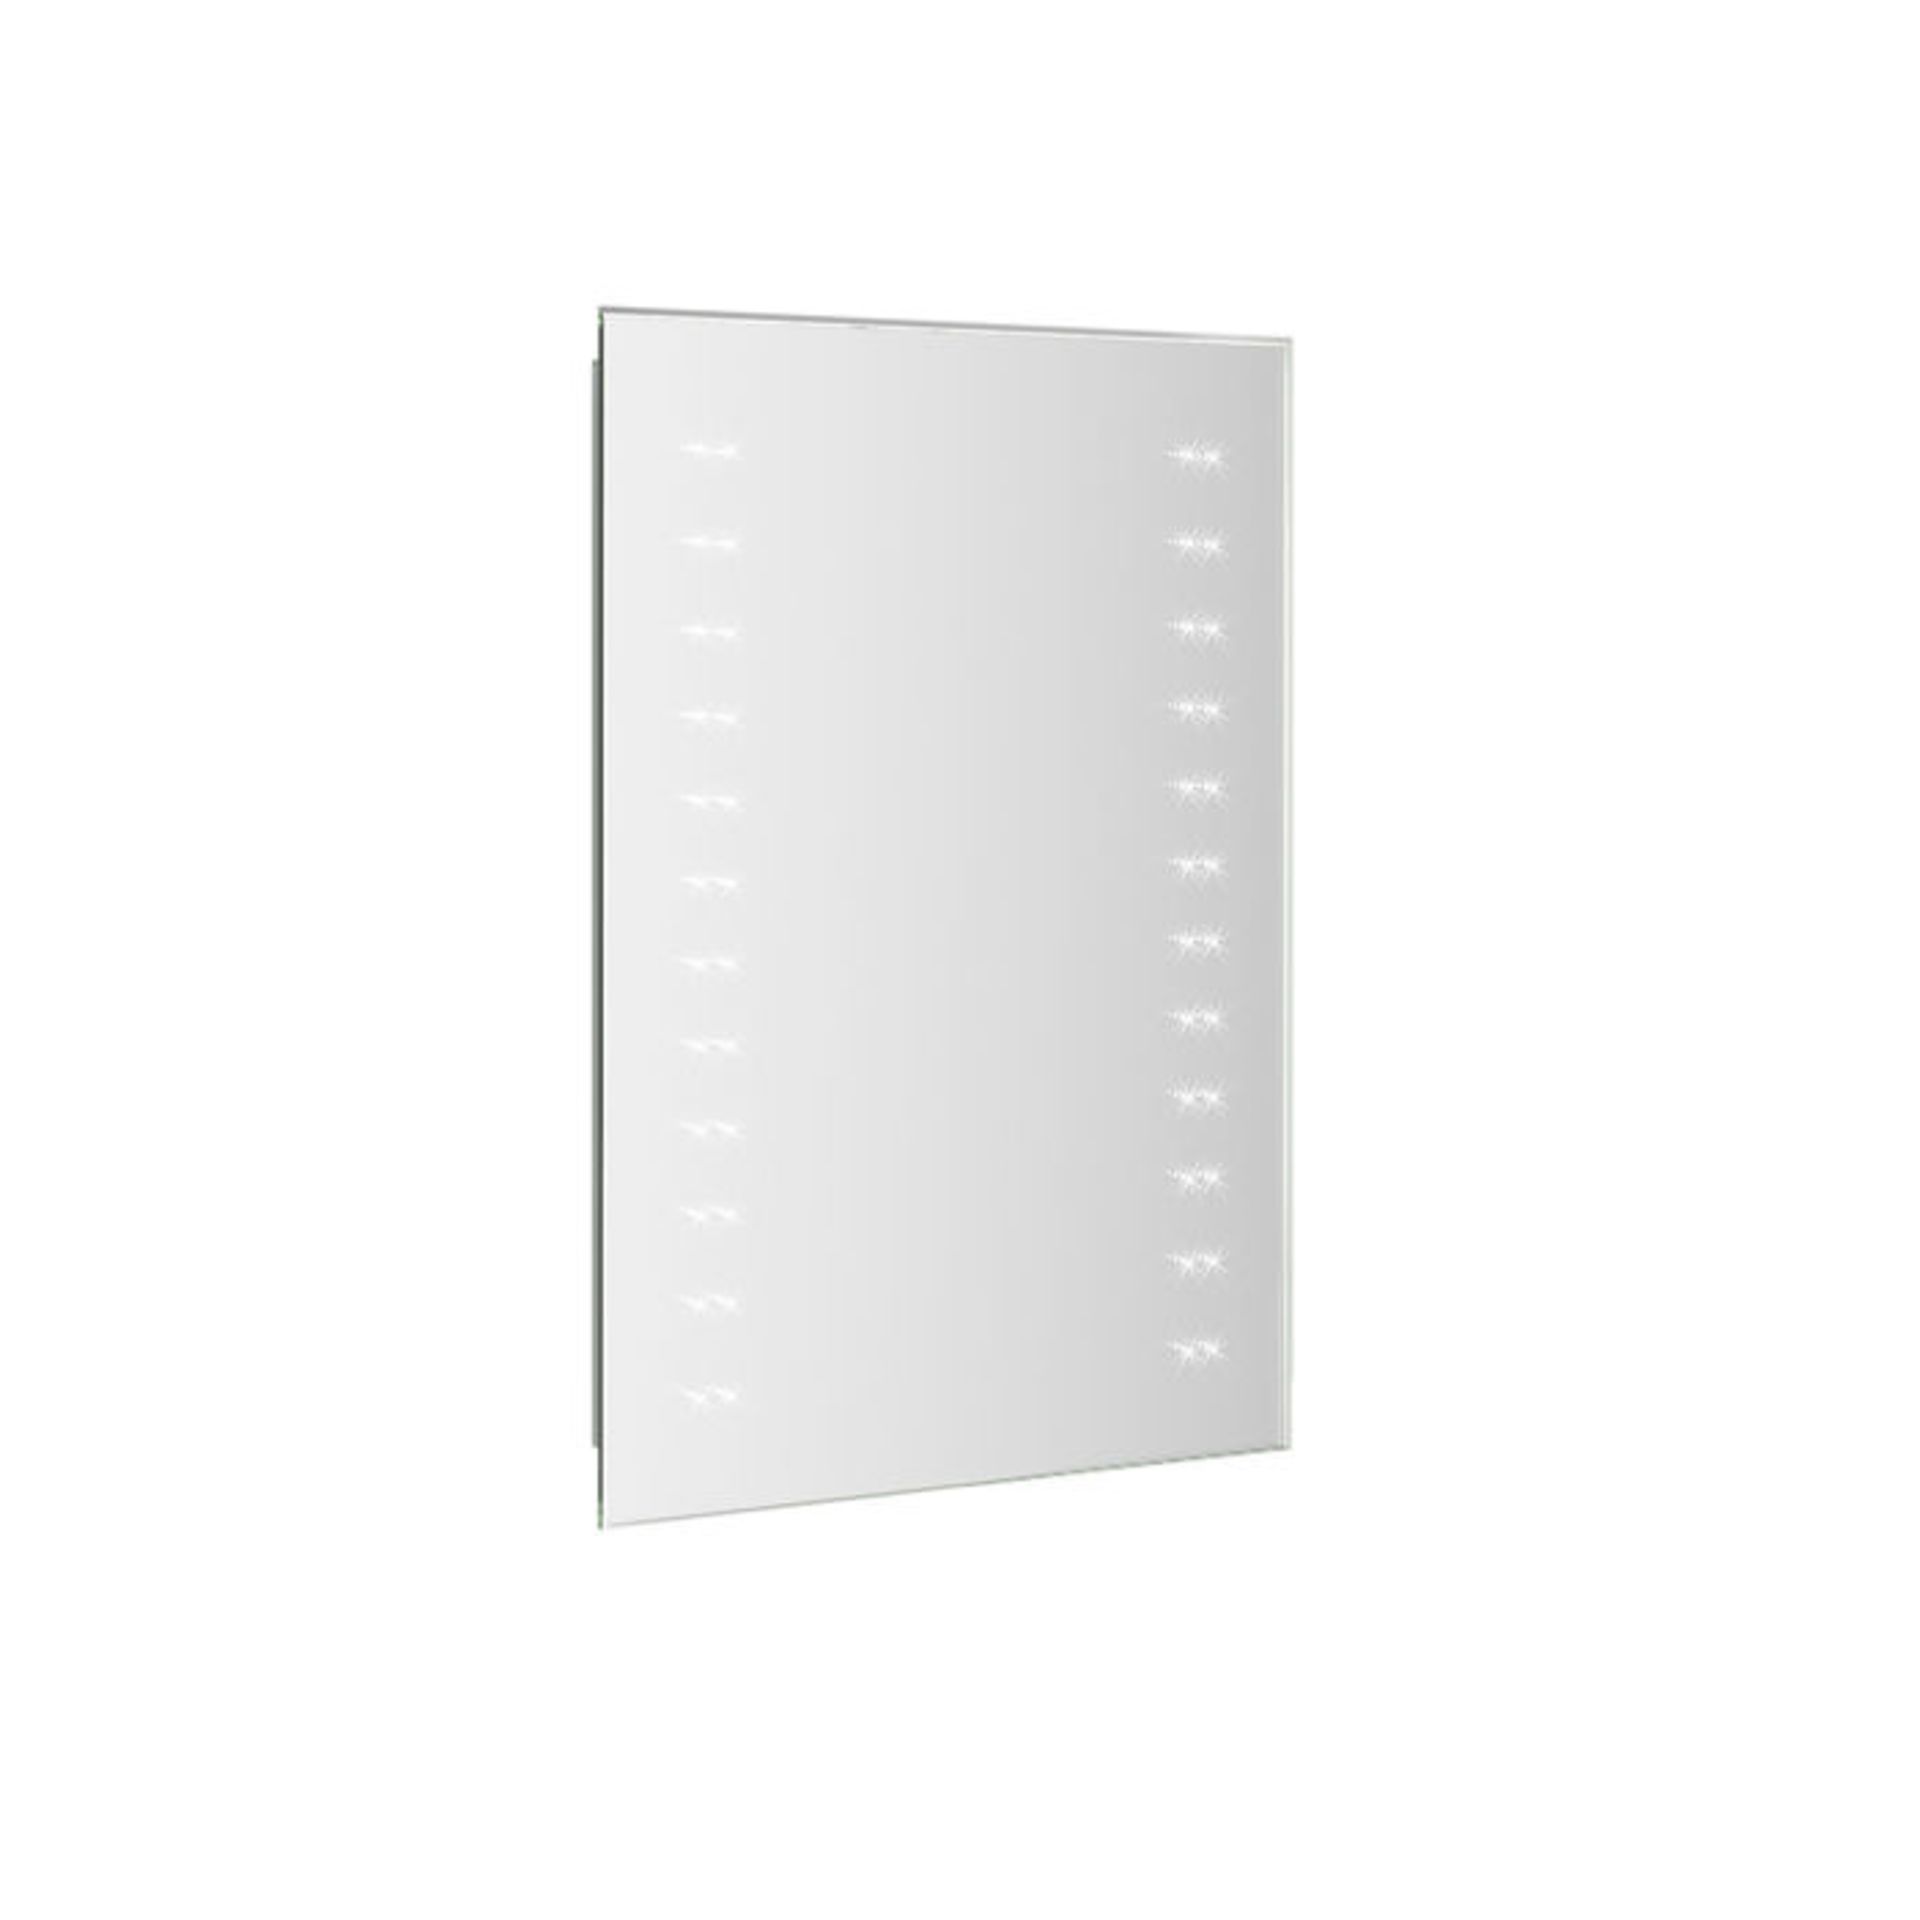 (XS101) 390x500mm Battery Operated LED Mirror. RRP £249.99. Energy saving controlled On / Off switch